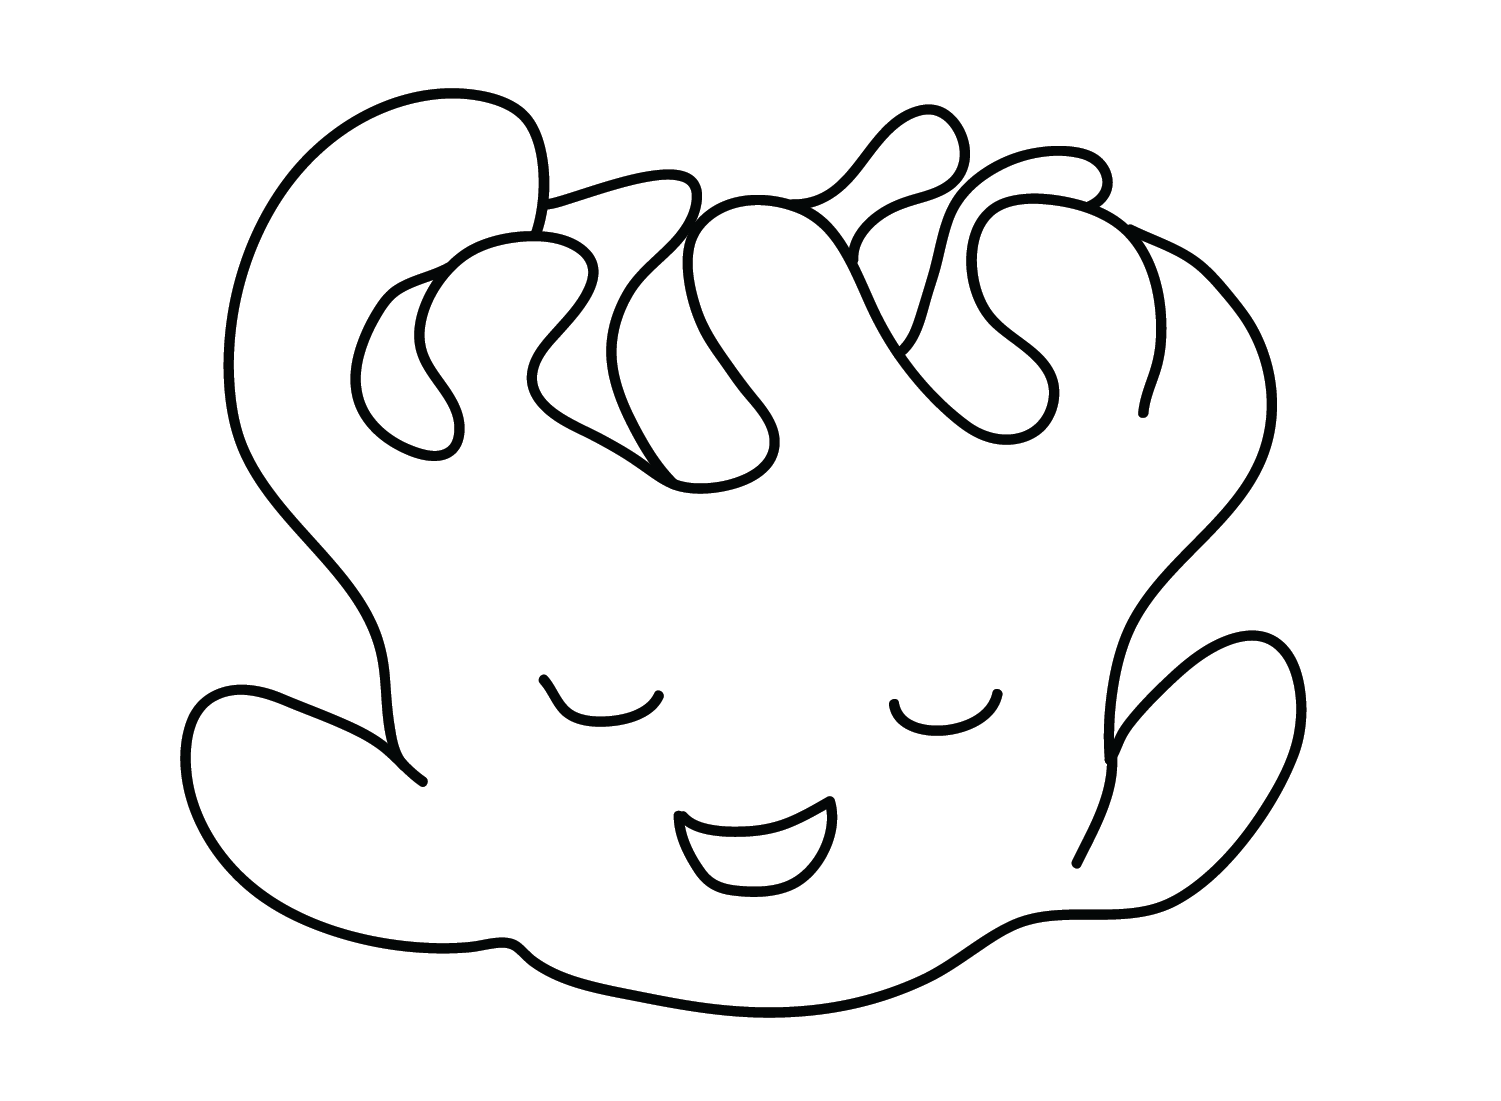 Milcery Free Coloring Page